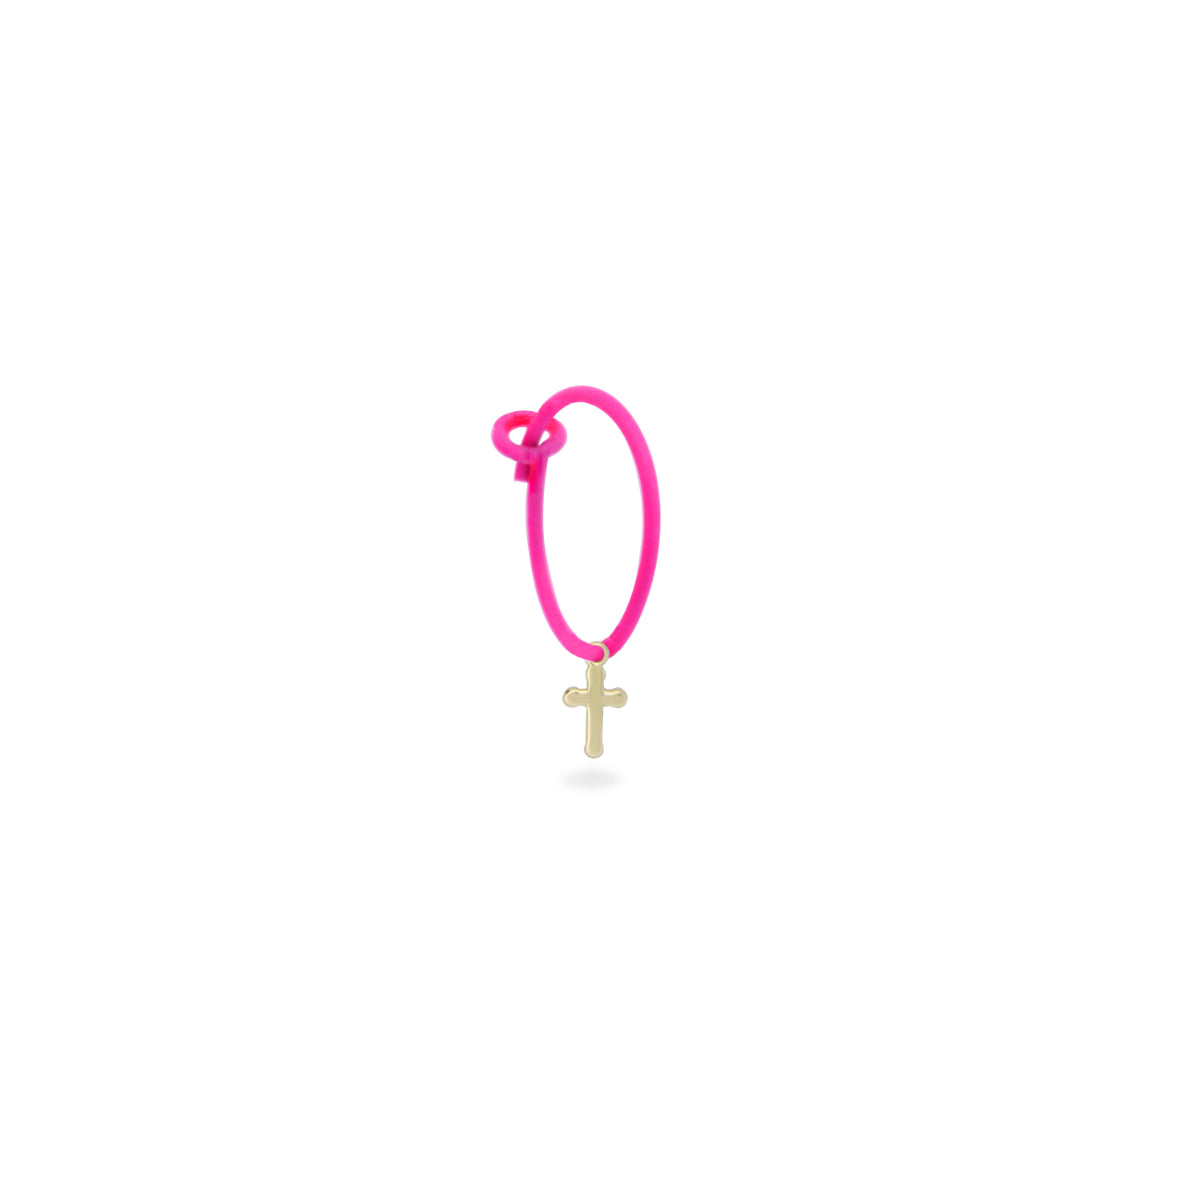 Earrings - Single earring with Cross and painted hoop - ORO18KT - 2 | Rue des Mille